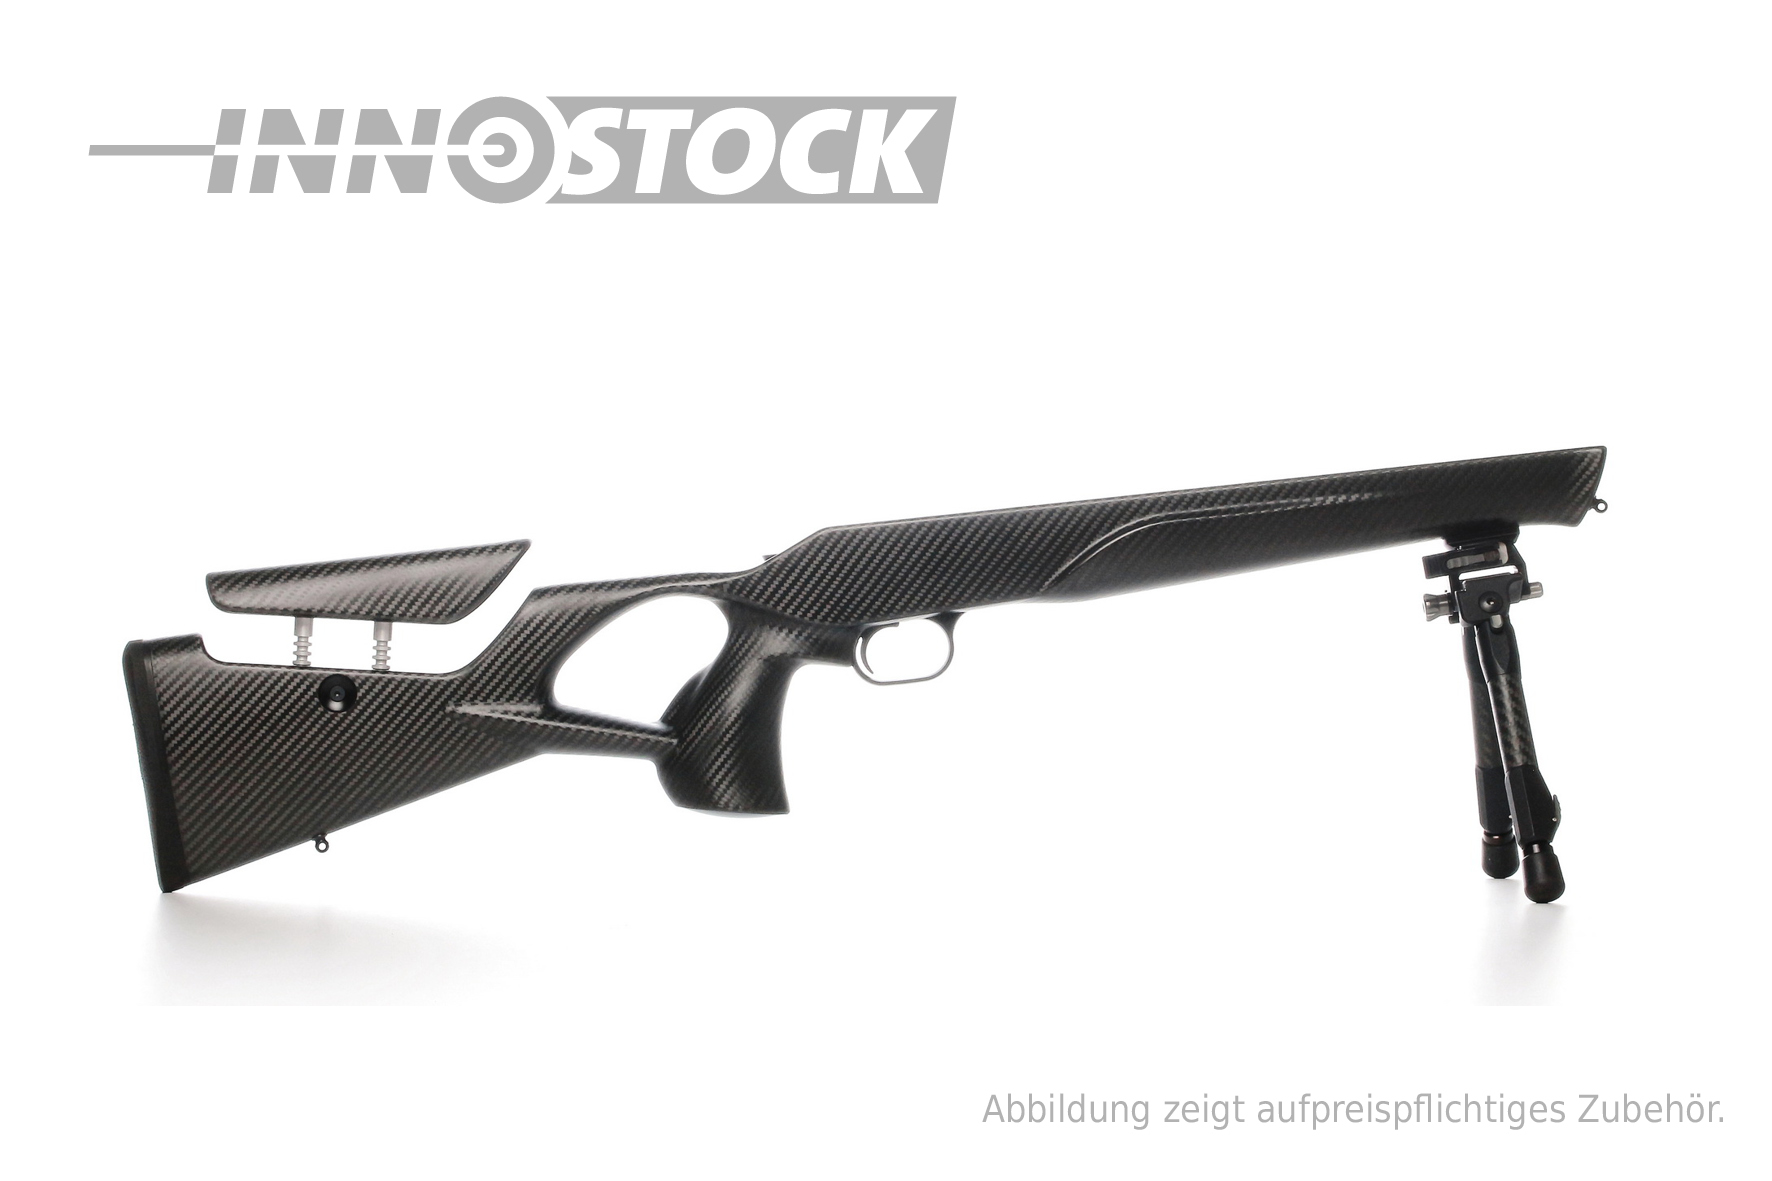 Carbon Stock - M932 - for System Blaser R93 - Semi Weight (19MM) - inkl. Spartan Adapter